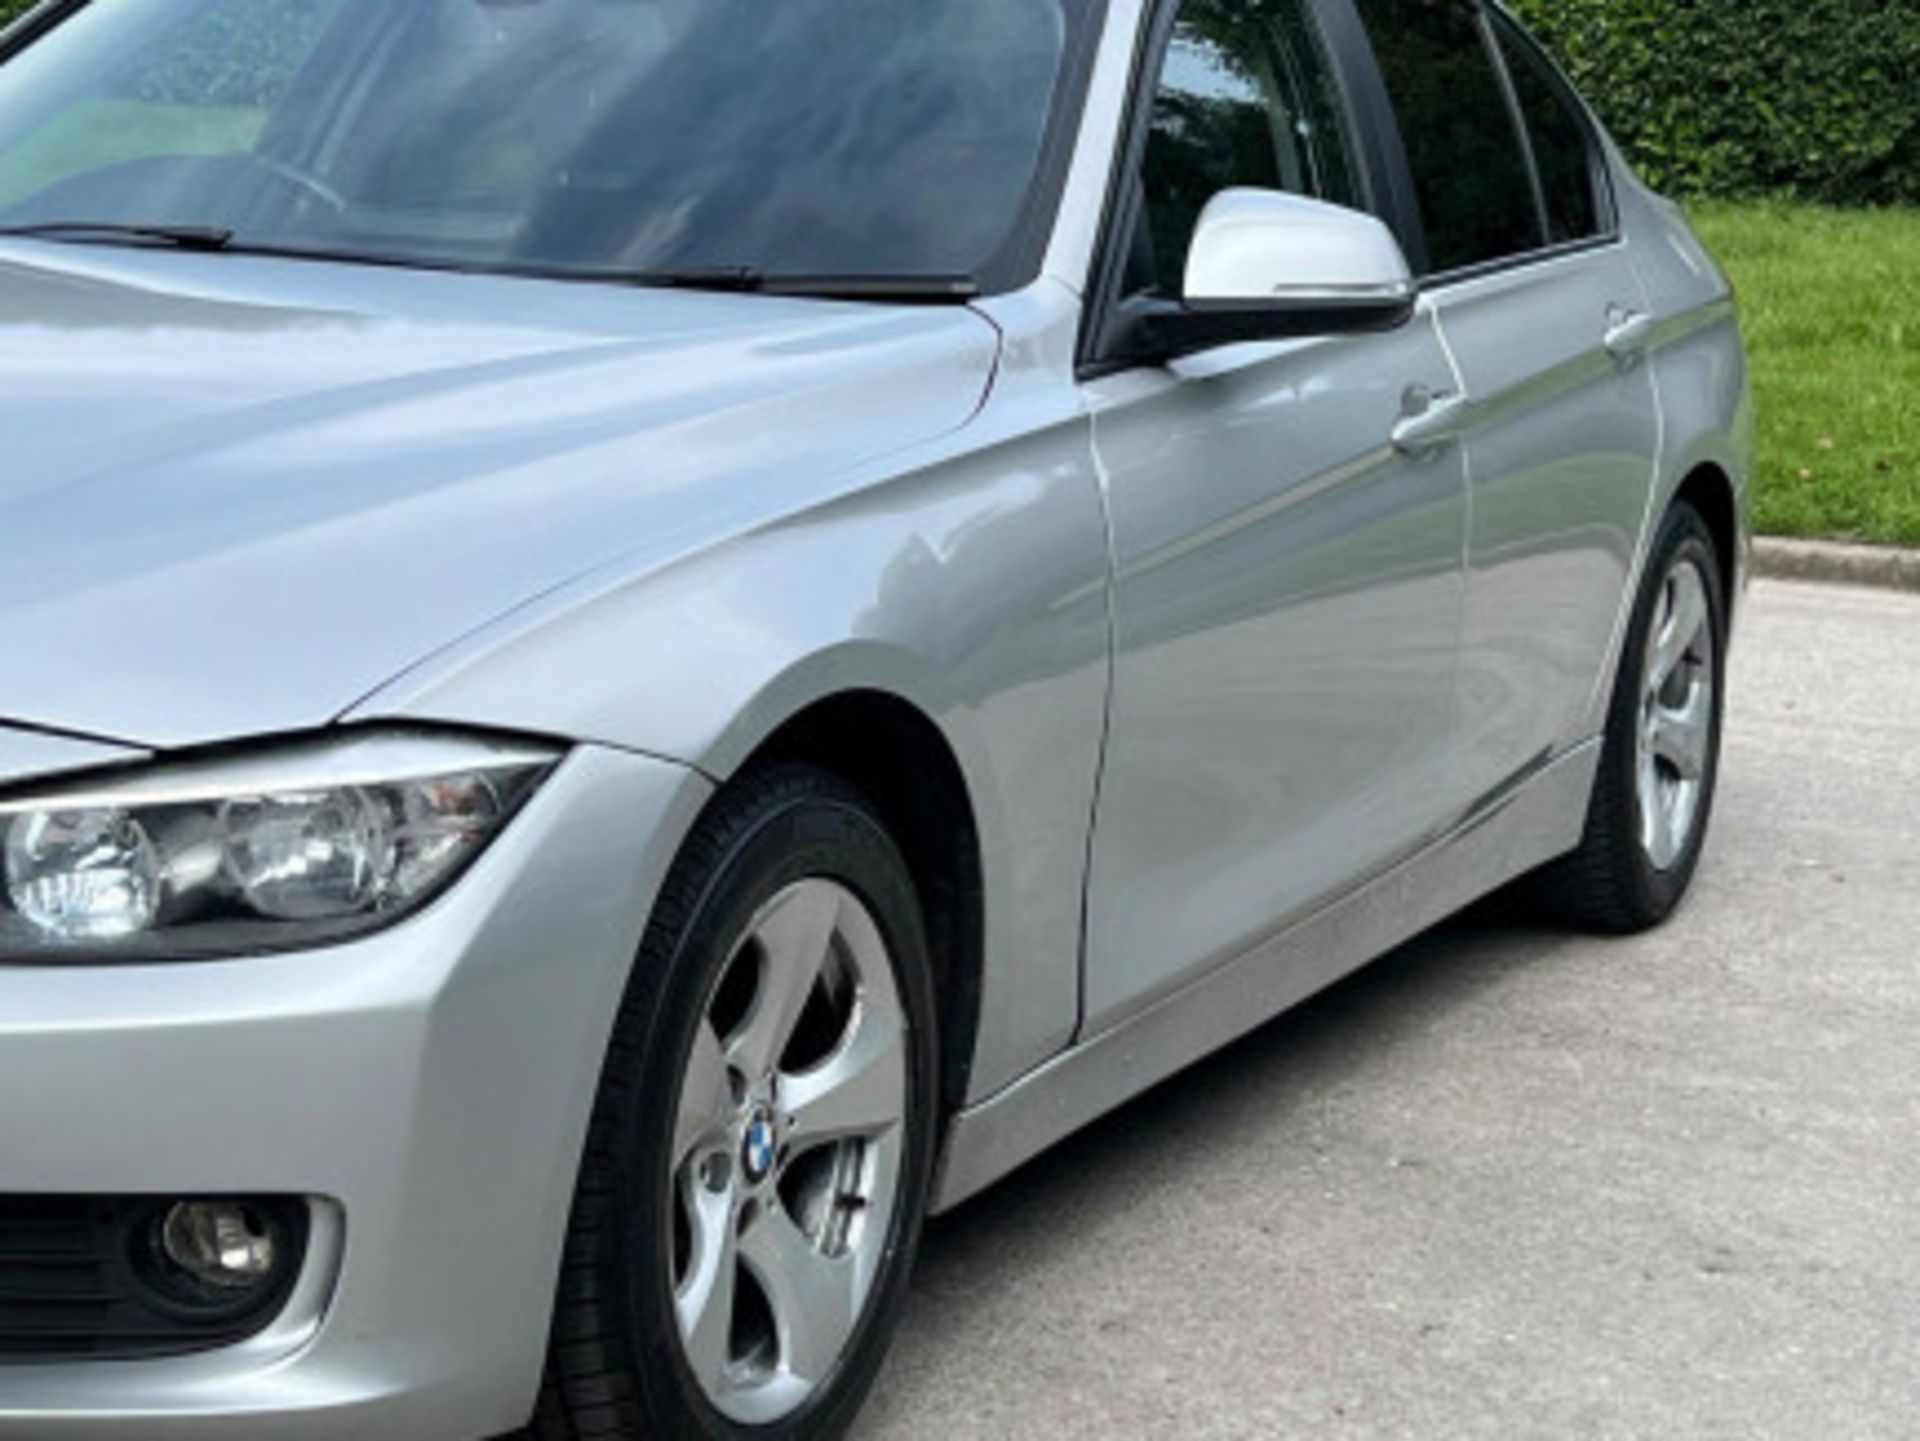 BMW 3 SERIES 2.0 DIESEL ED START STOP - A WELL-MAINTAINED GEM >>--NO VAT ON HAMMER--<< - Image 110 of 229